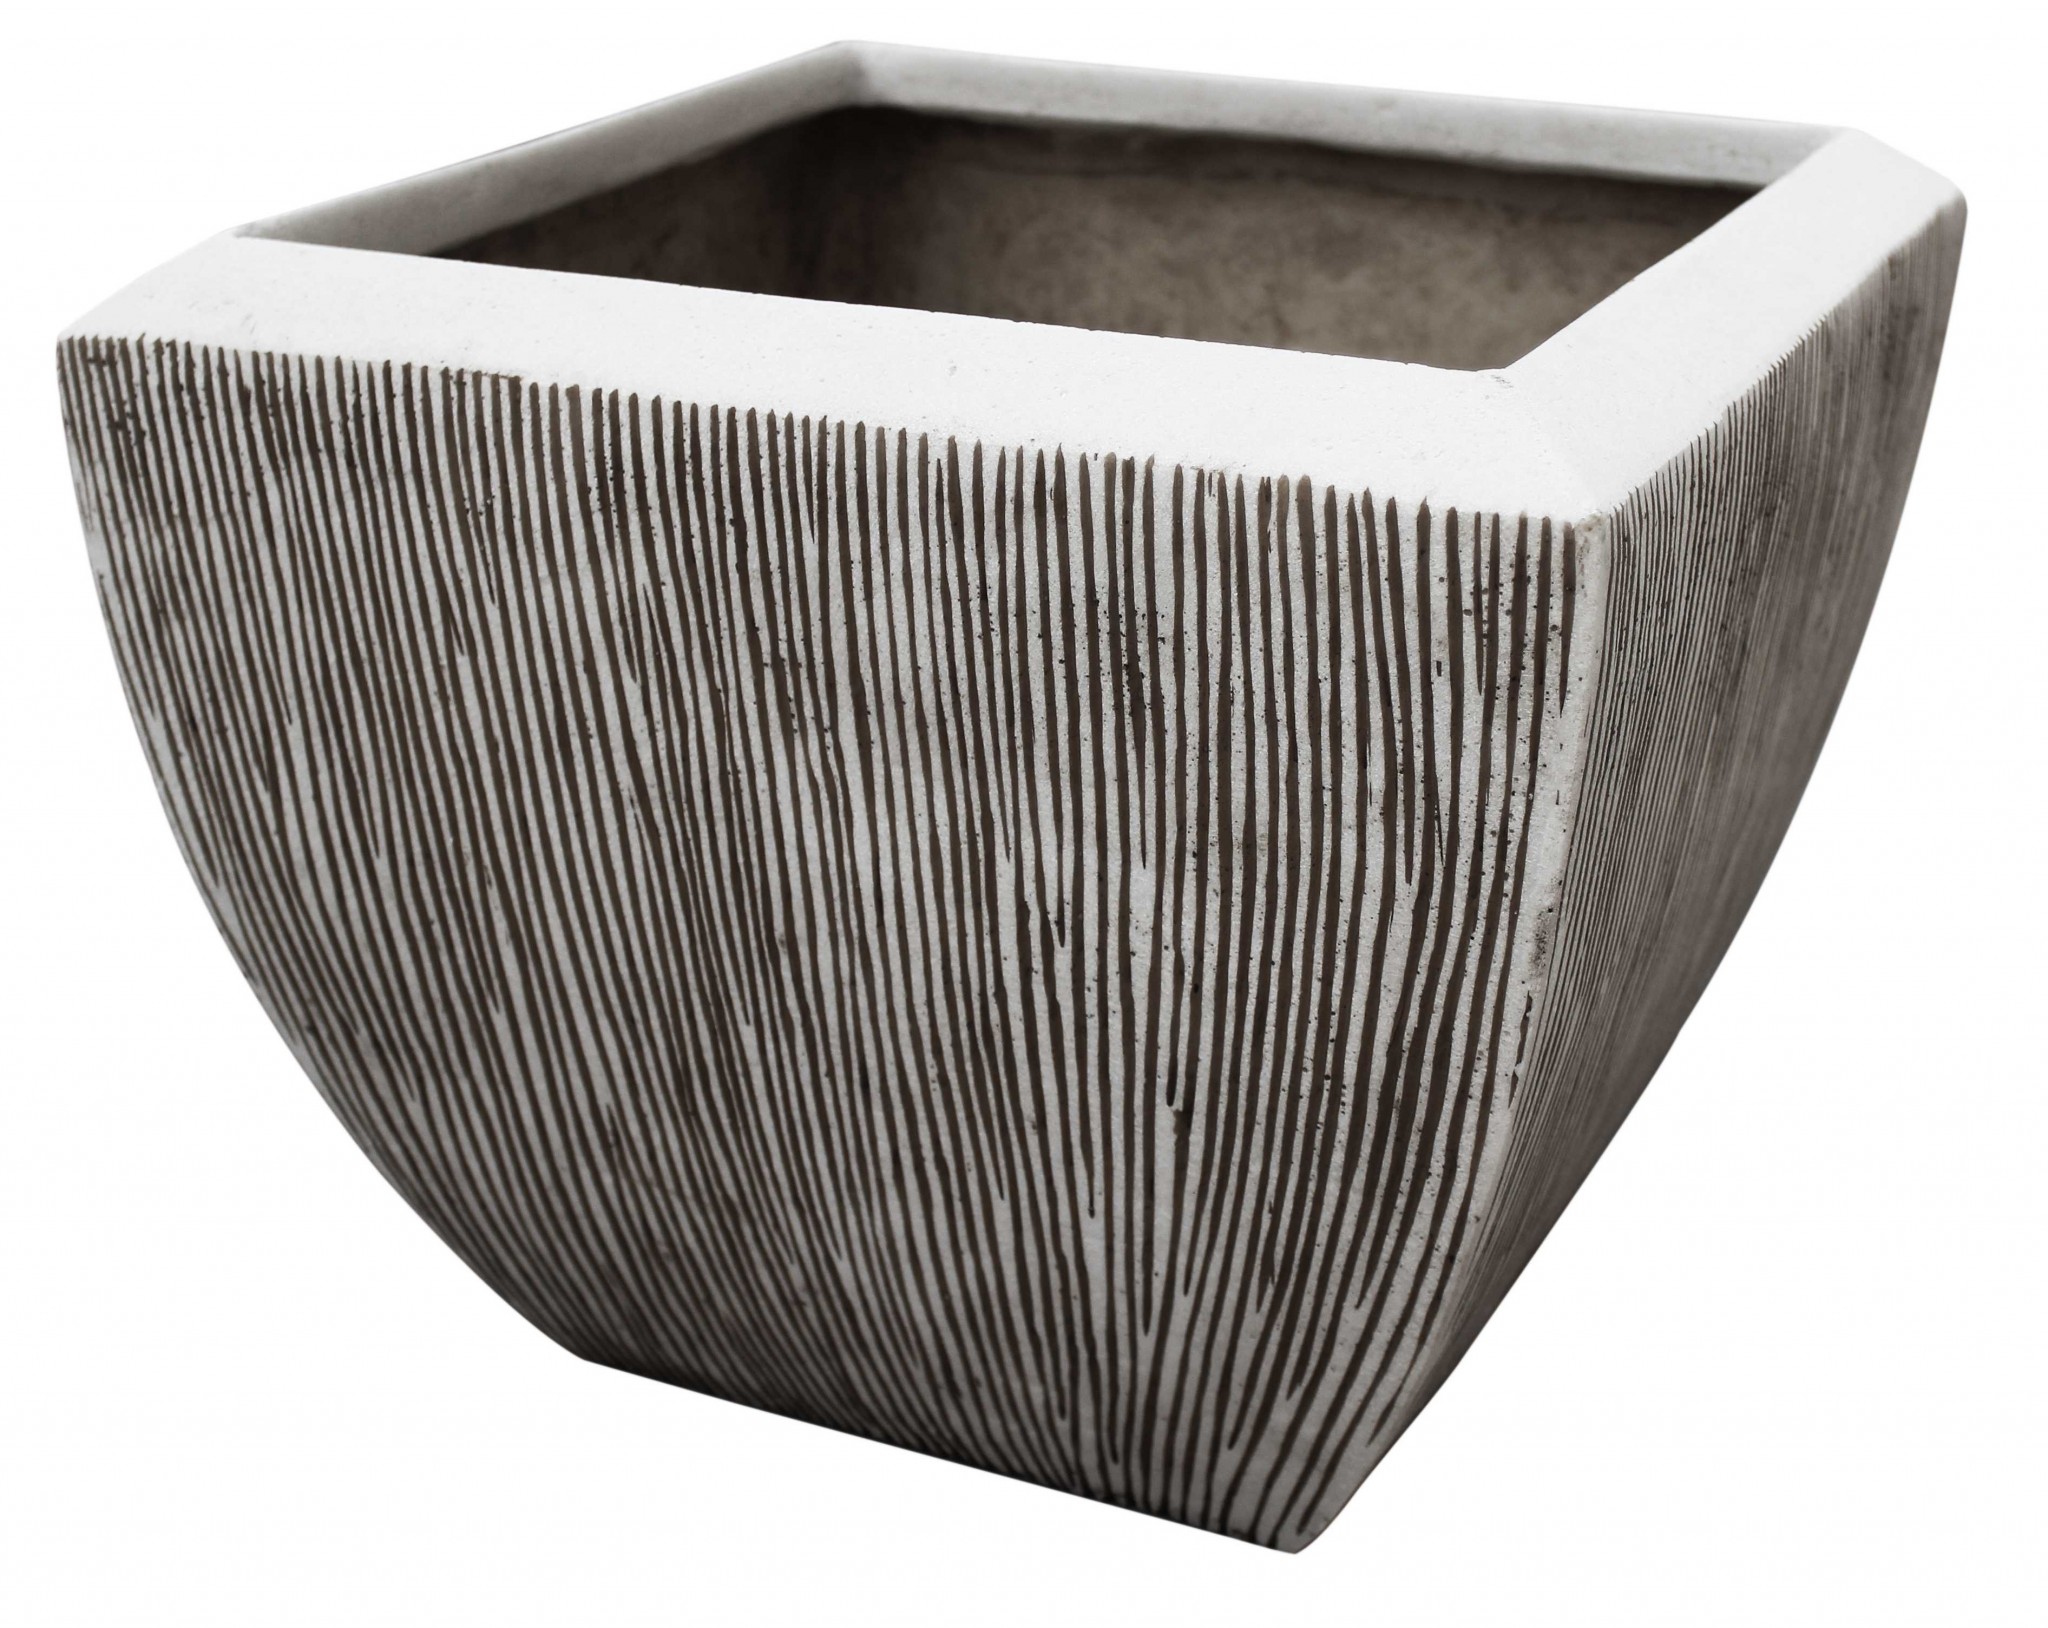 HomeRoots Decor Large Distressed and Ribbed Flower Pot Planter